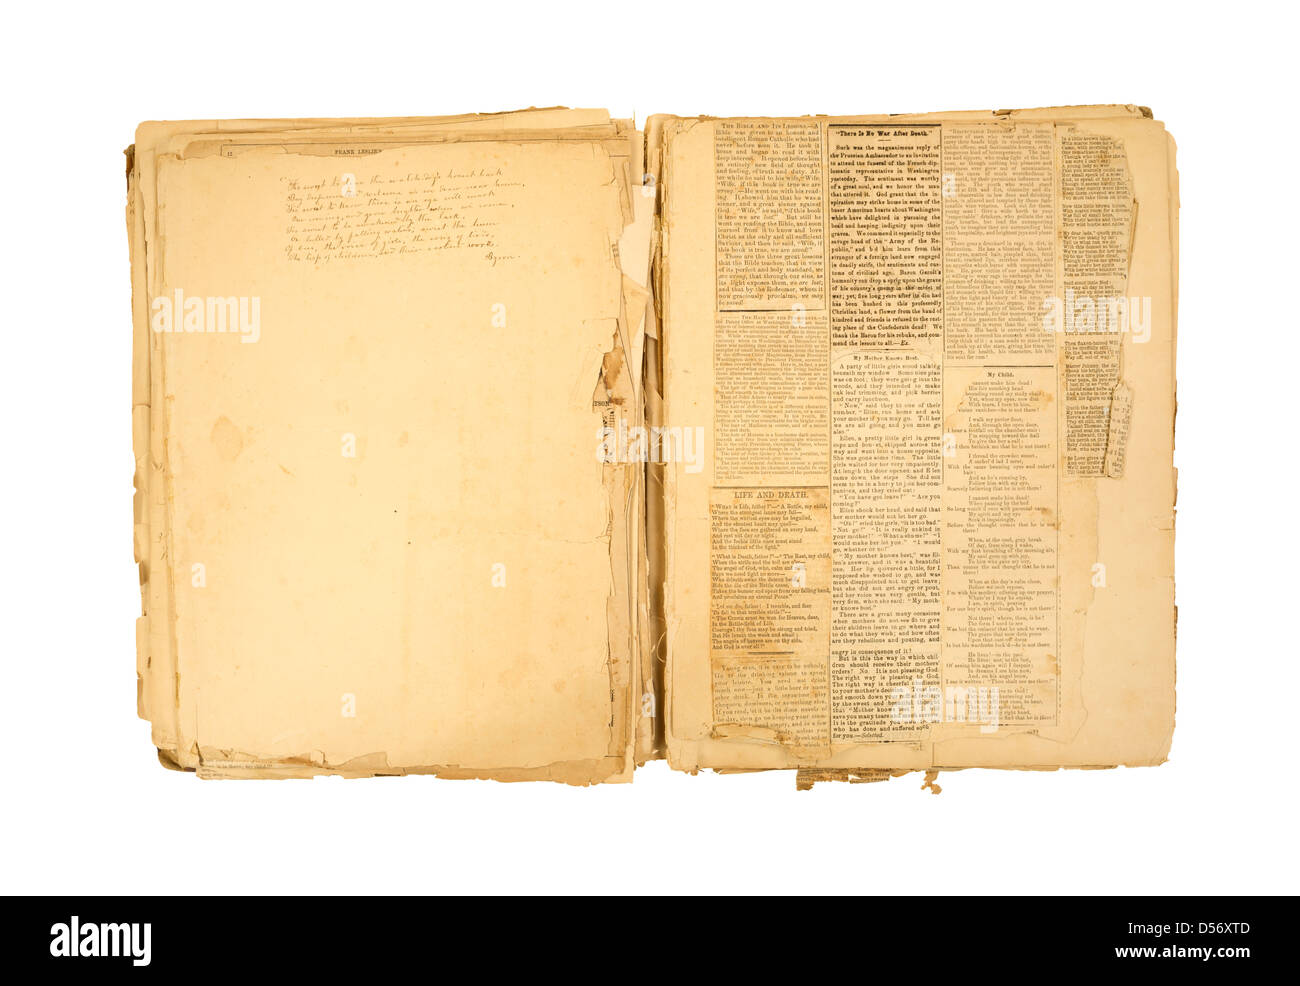 An antique scrapbook with a hand written poem and several newspaper clippings glued to weathered and yellowed pages. Stock Photo